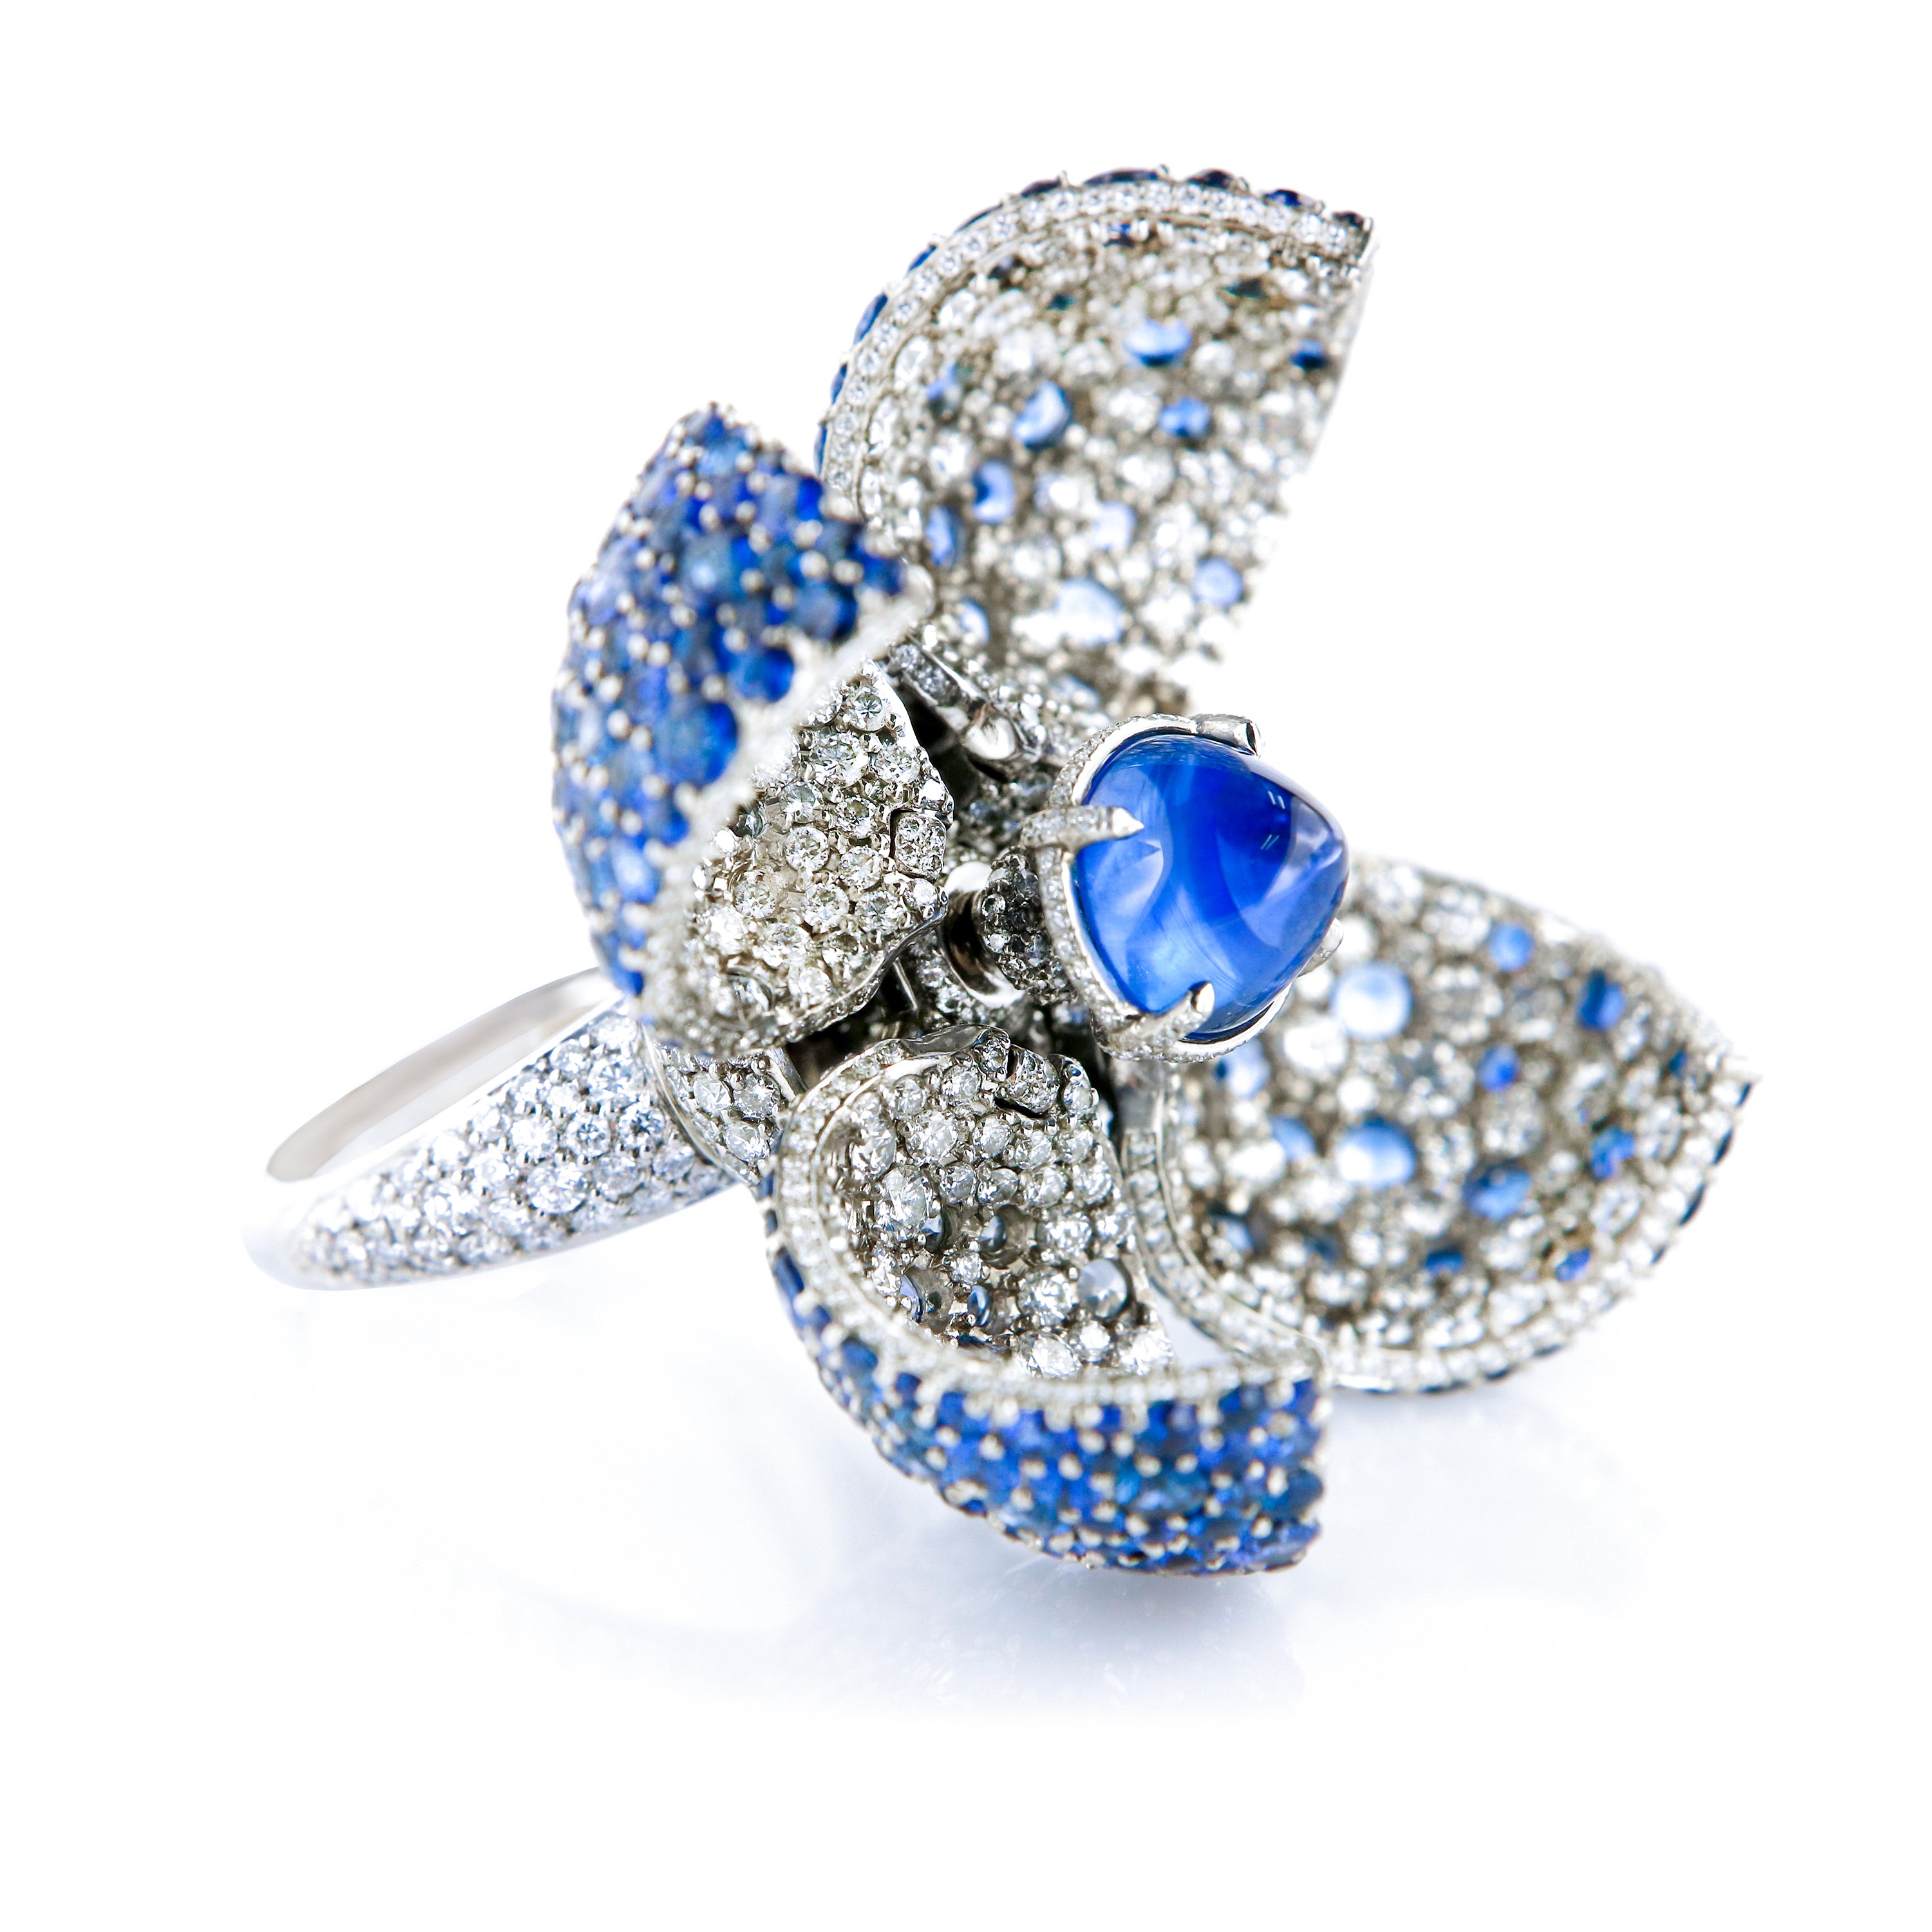 Ring "Blue Mangosteen"  White Gold with White Diamonds and Blue Sapphires